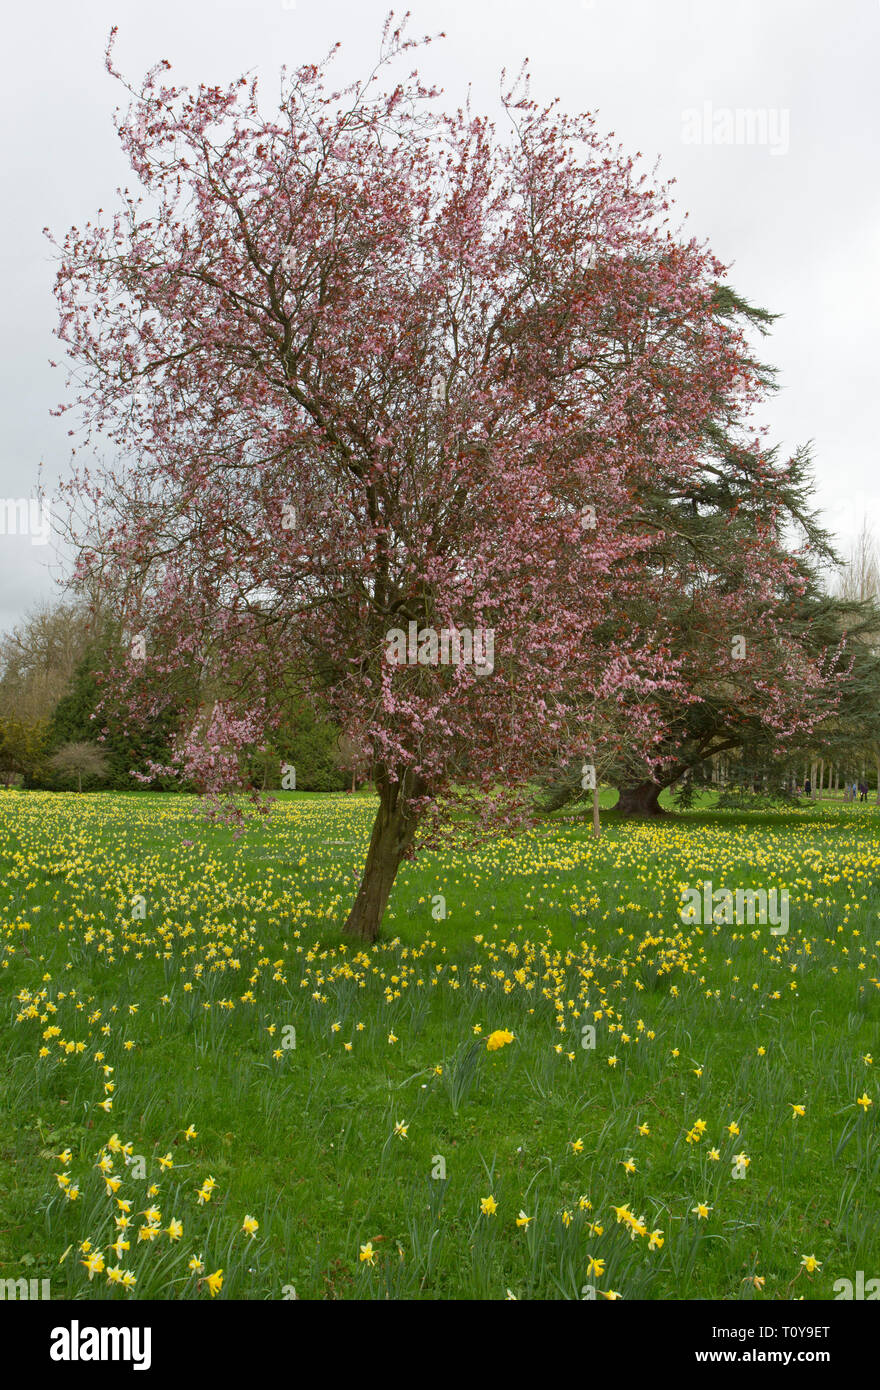 Flowering Cherry, Prunus variety, surrounded by Wild Daffodils, Narcissus pseudo-narcissus, Madresfield Court, near Malvern, Worcestershire, UK. Stock Photo